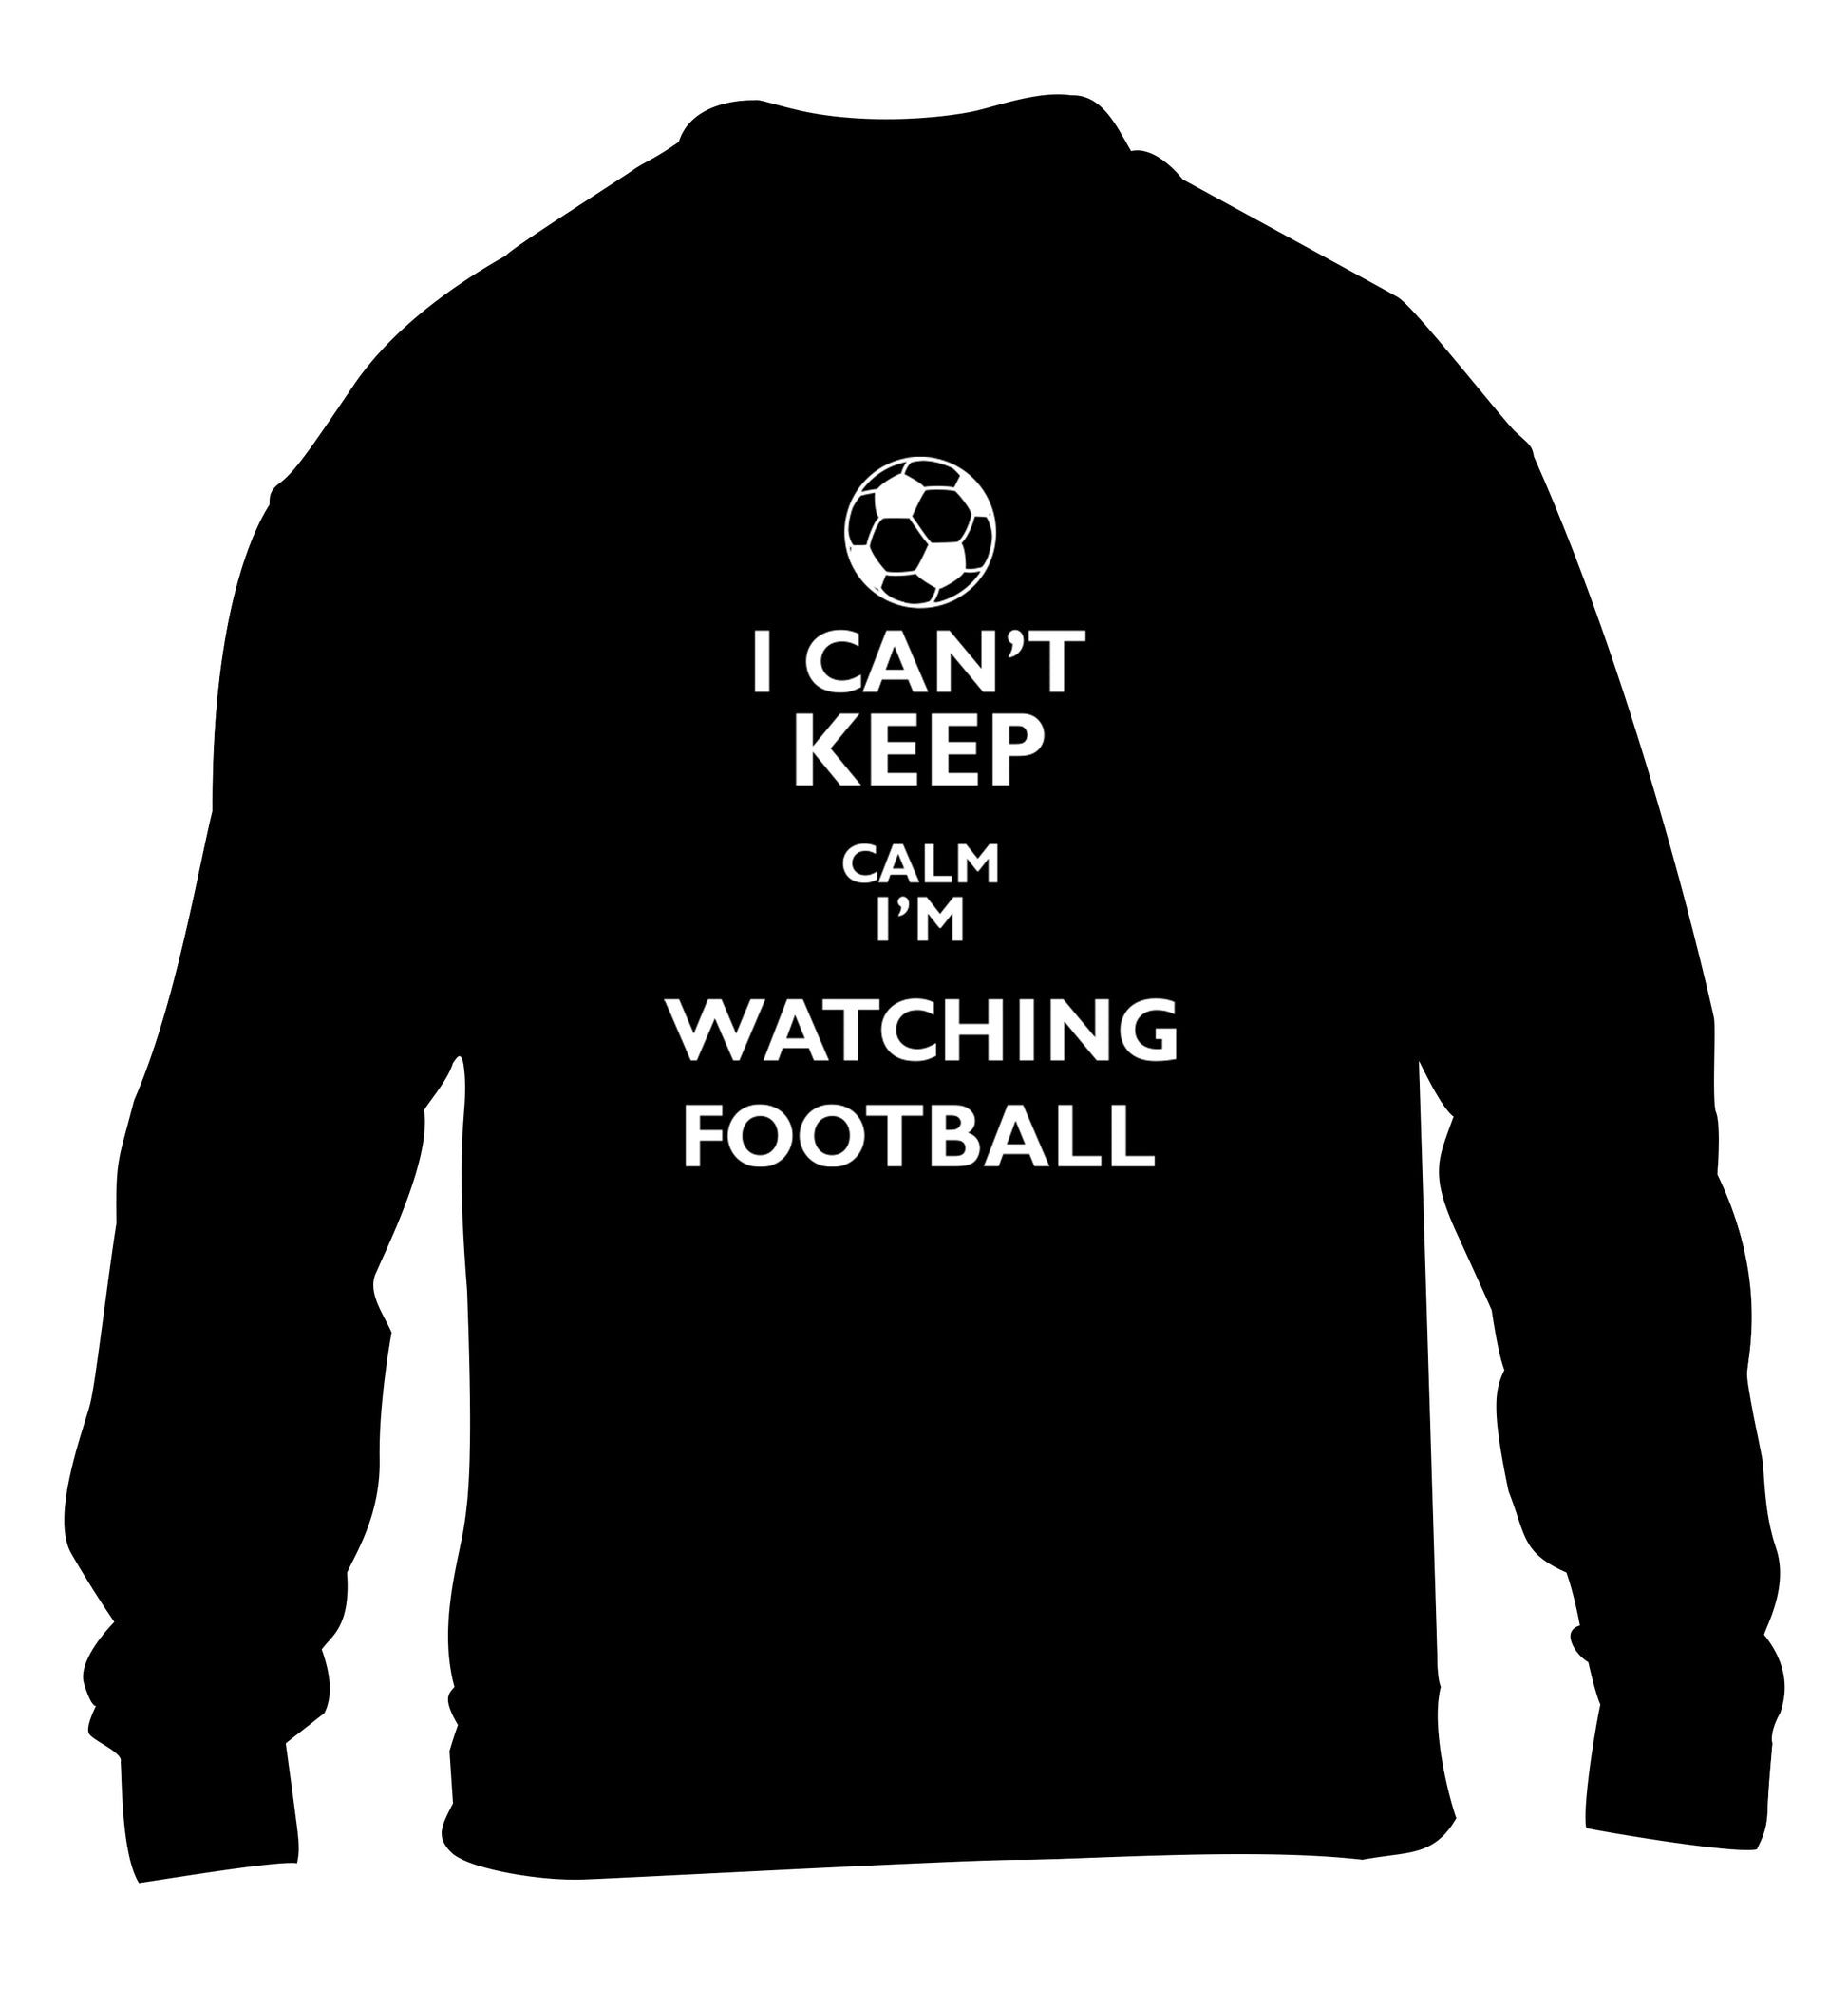 I can't keep calm I'm watching the football children's black sweater 12-14 Years